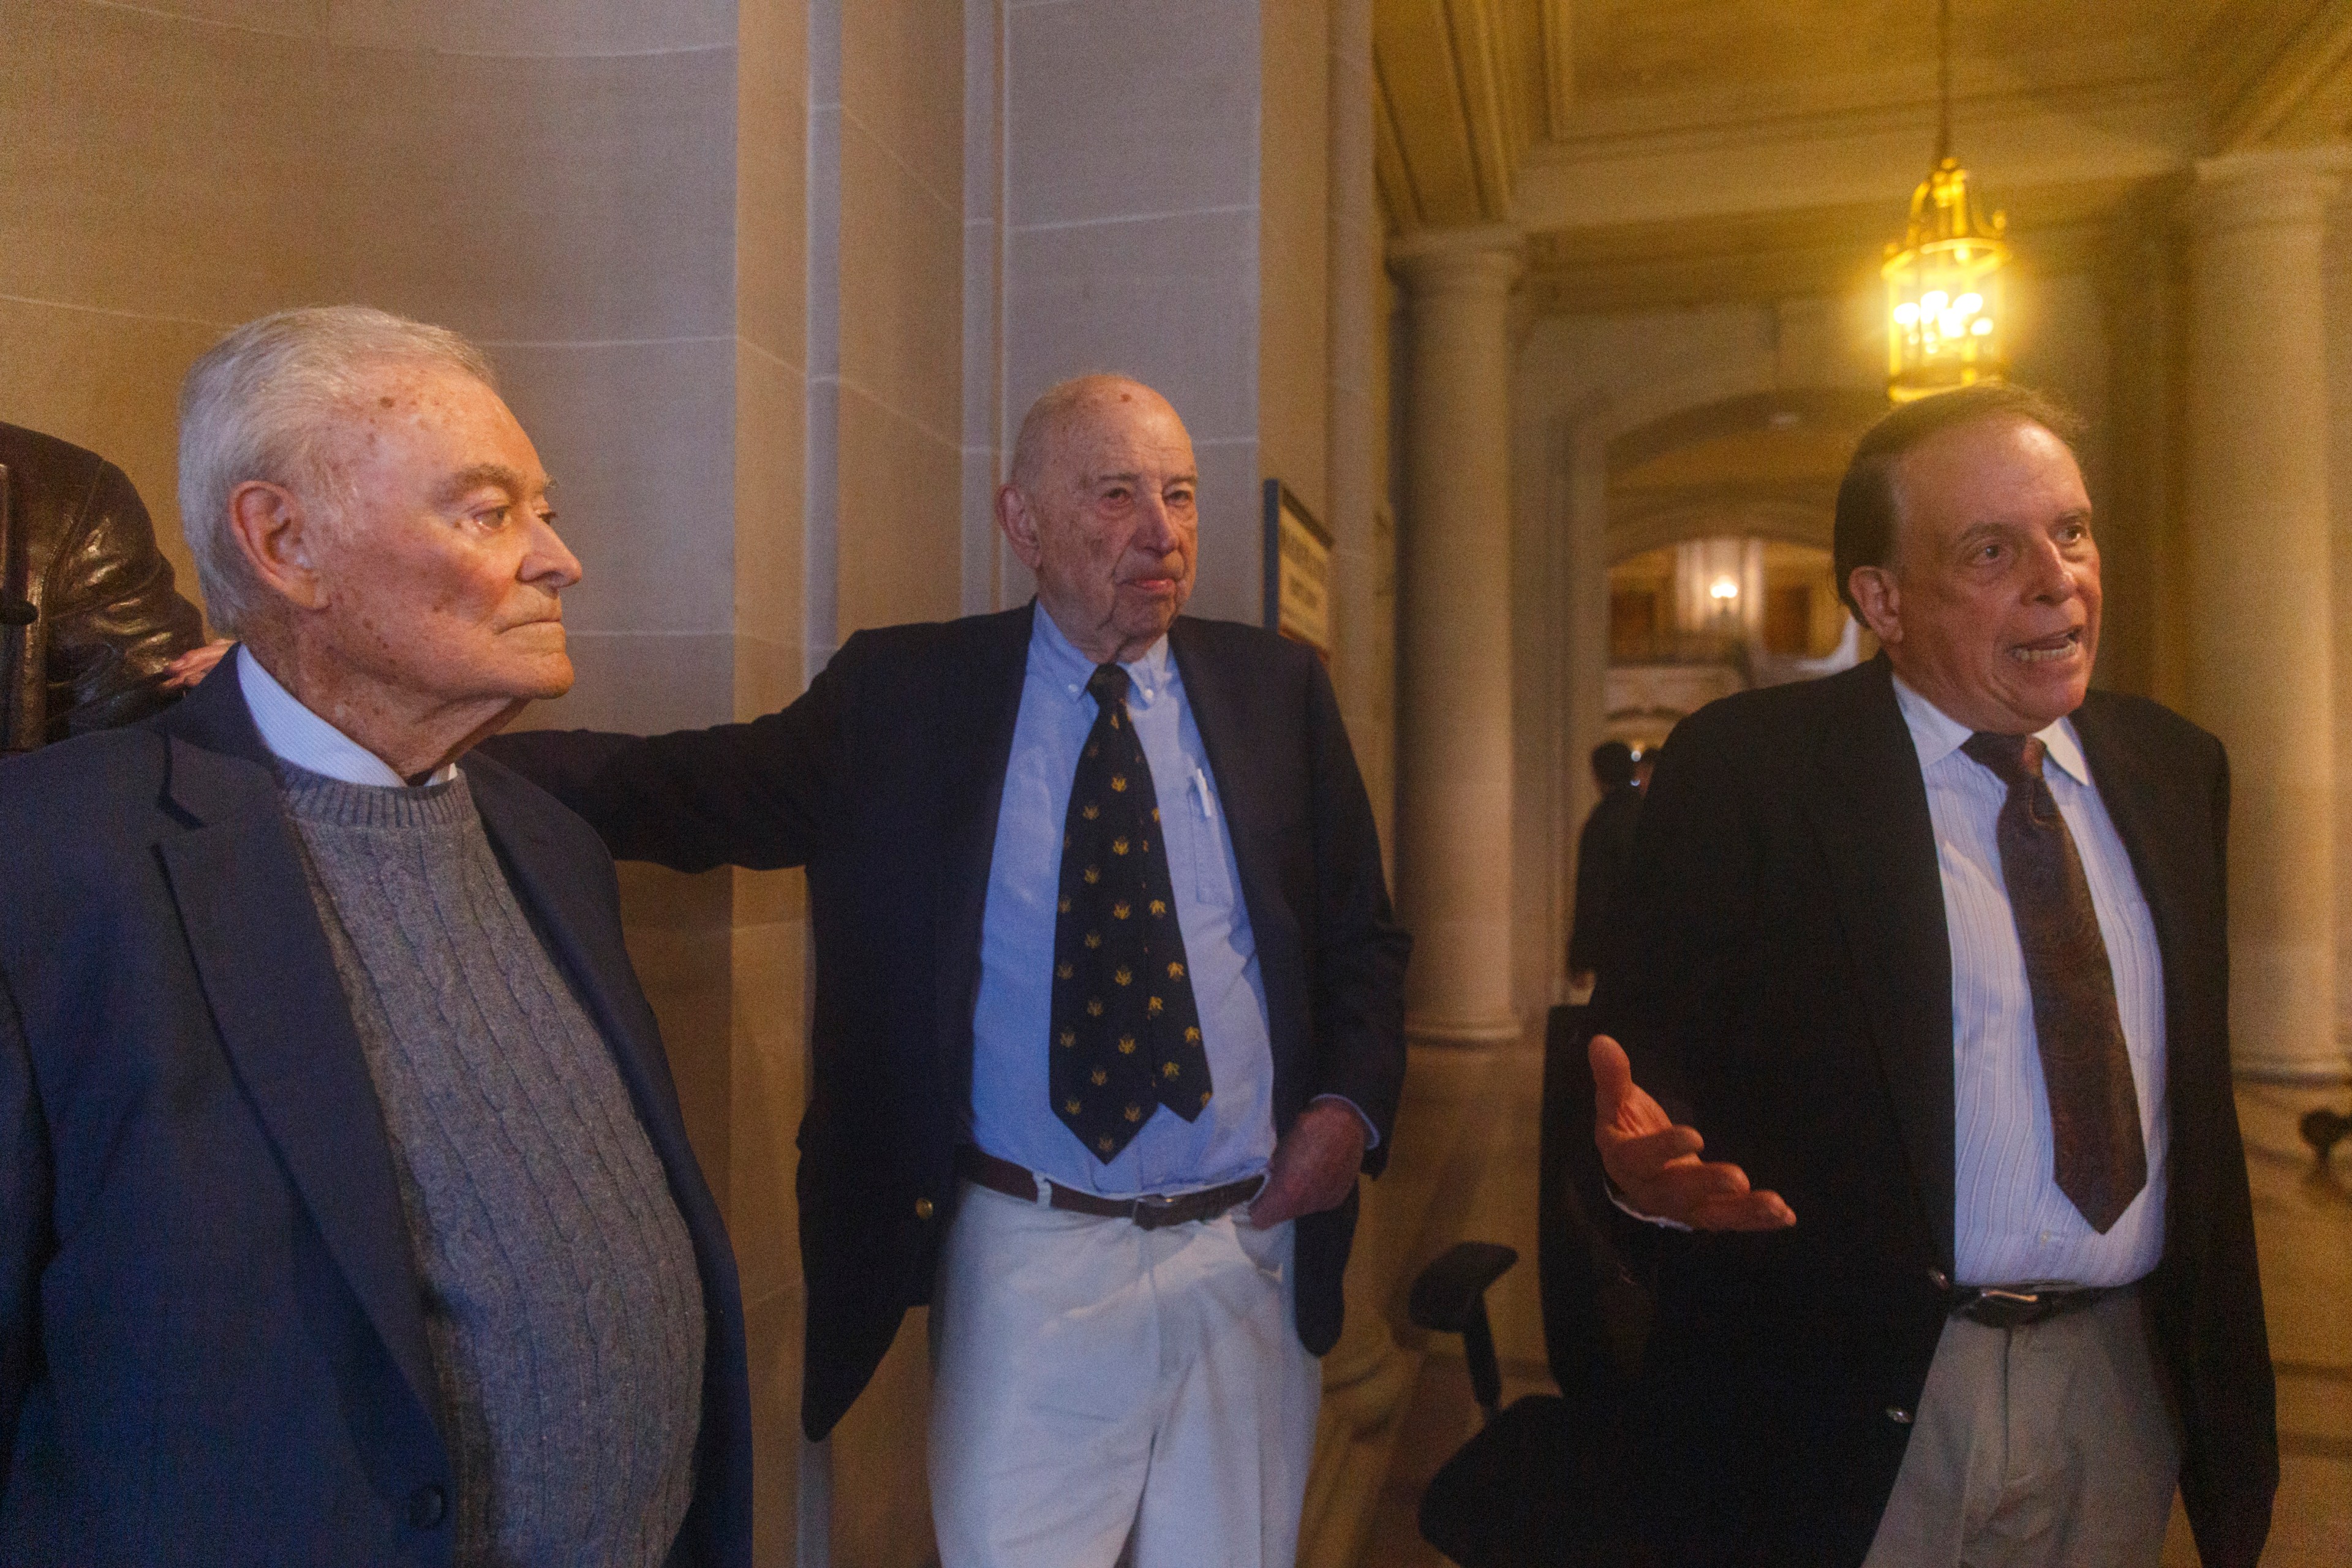 Three elderly men in suits are gathered in a room with classical architecture and warm lighting.